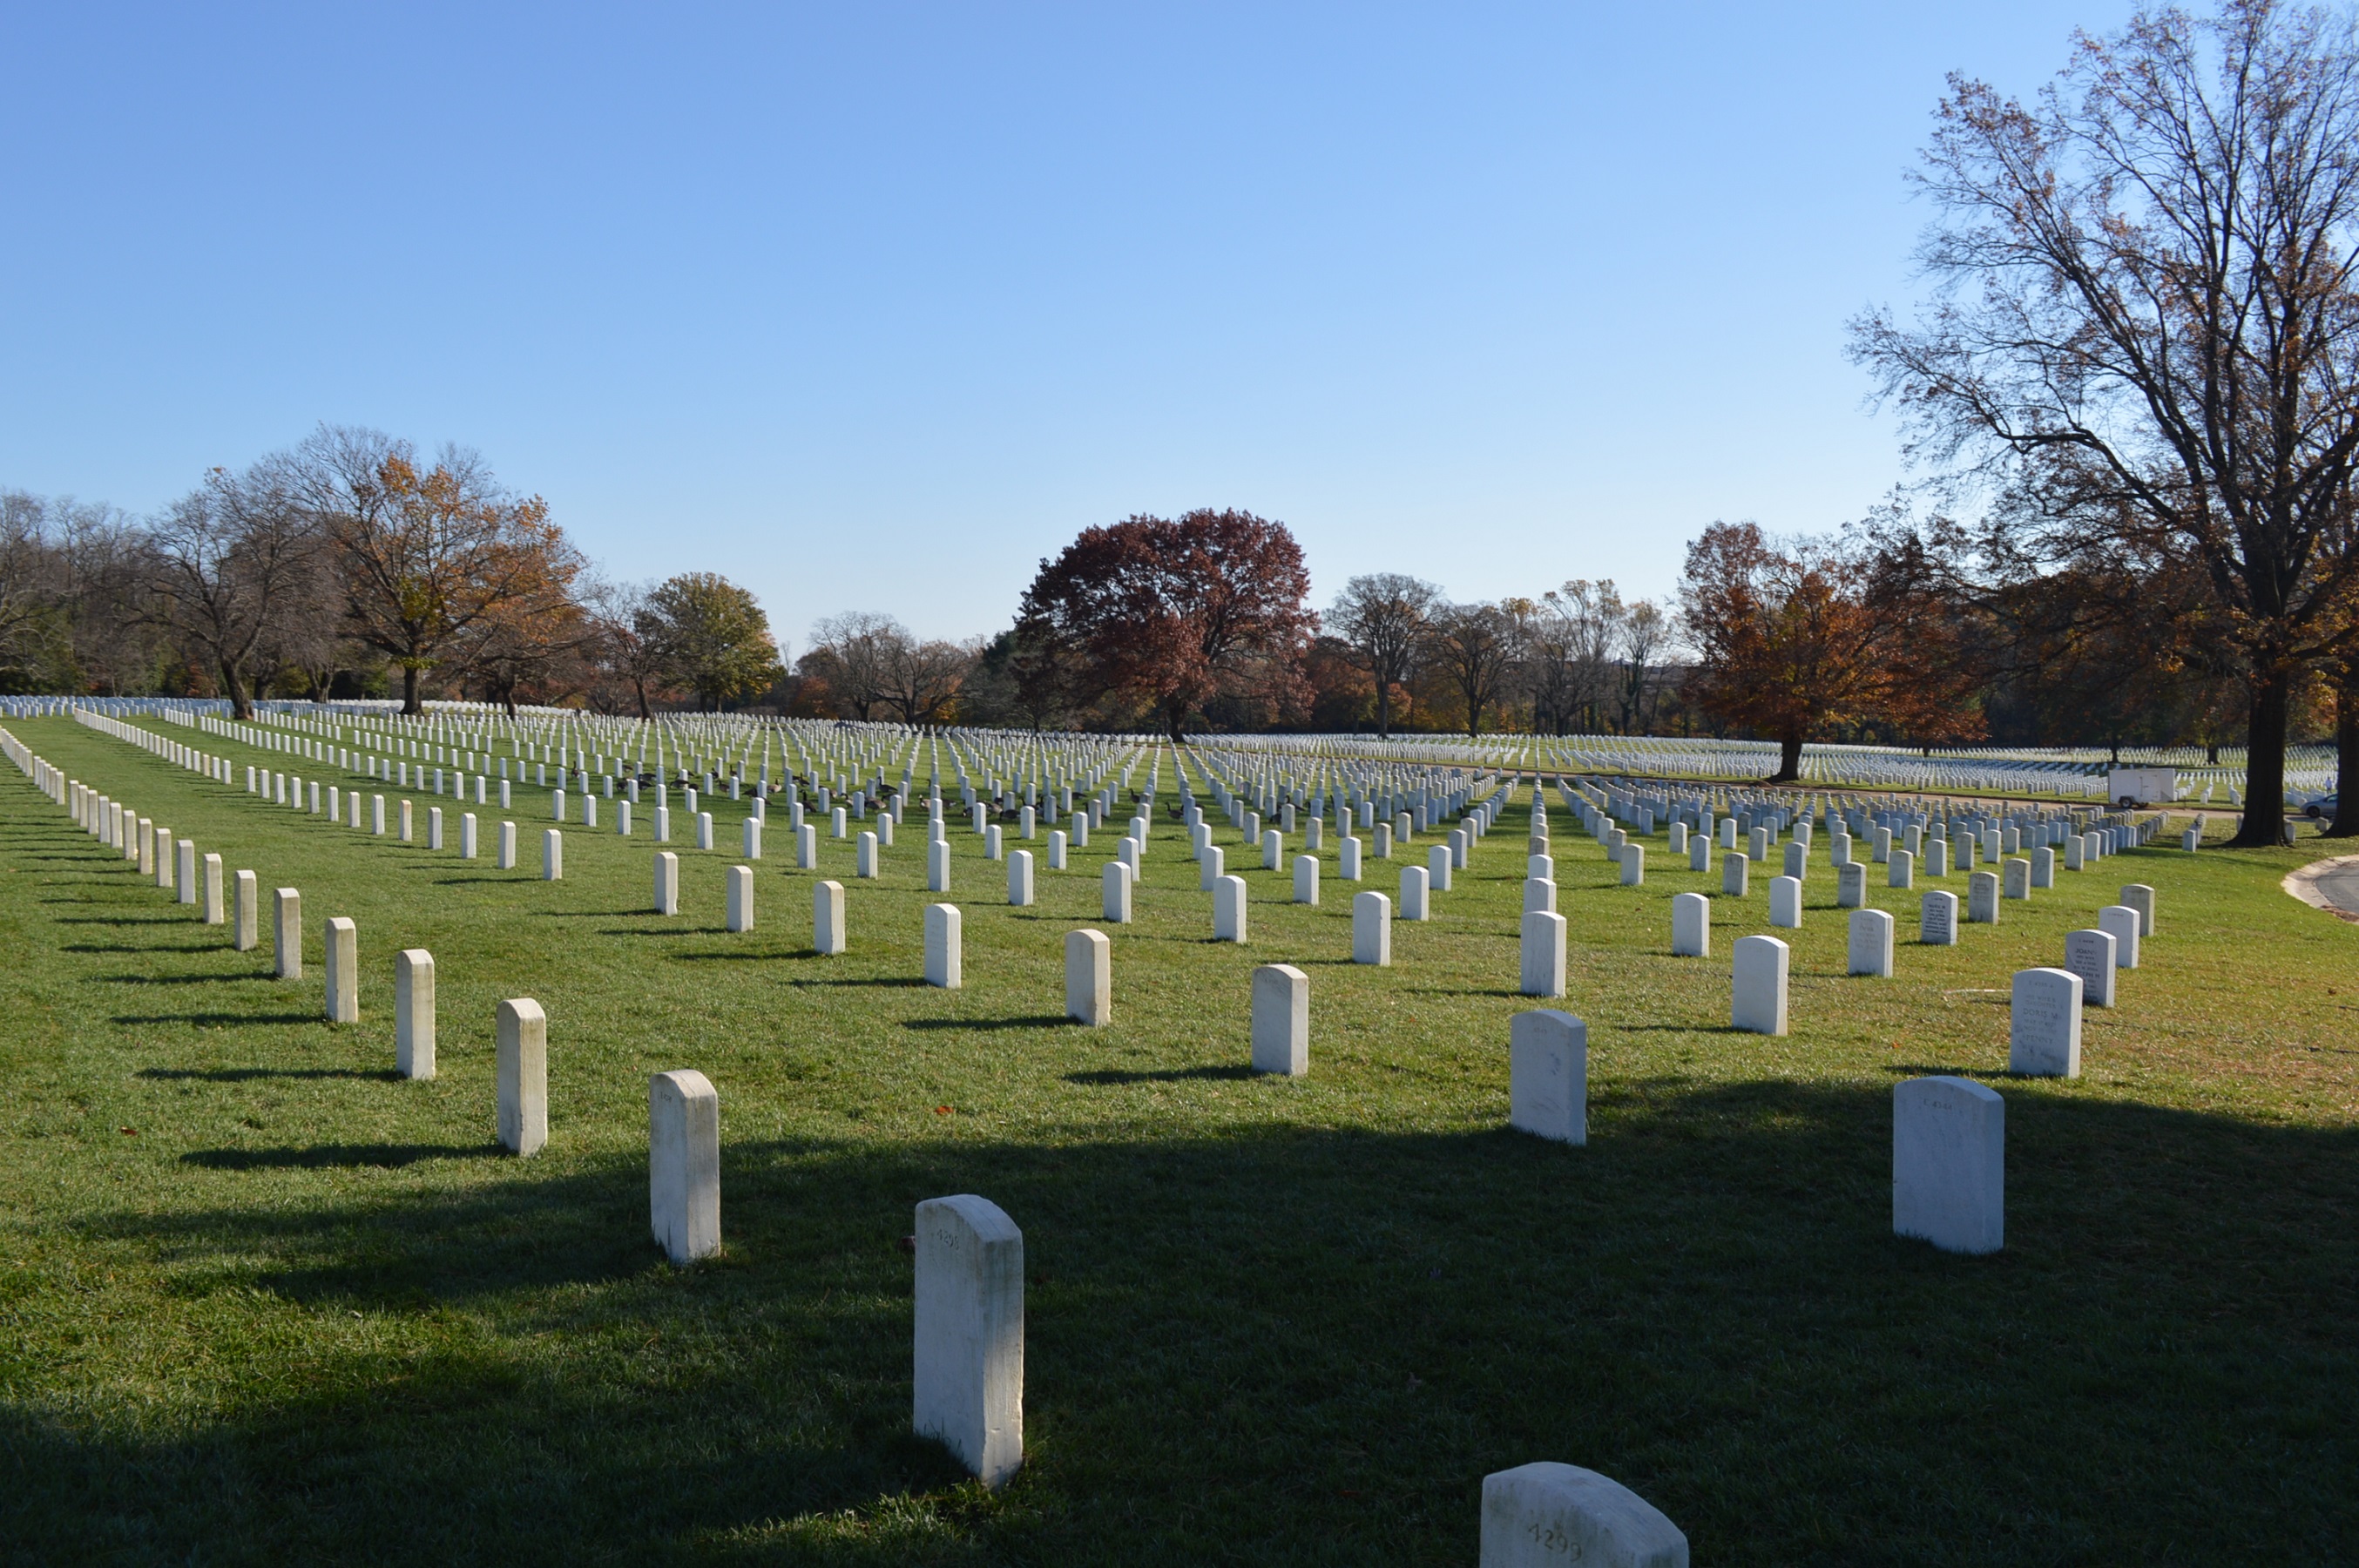 Armistice Day Nov. 11, 2018 at Baltimore National Cemetery (Anthony C. Hayes)